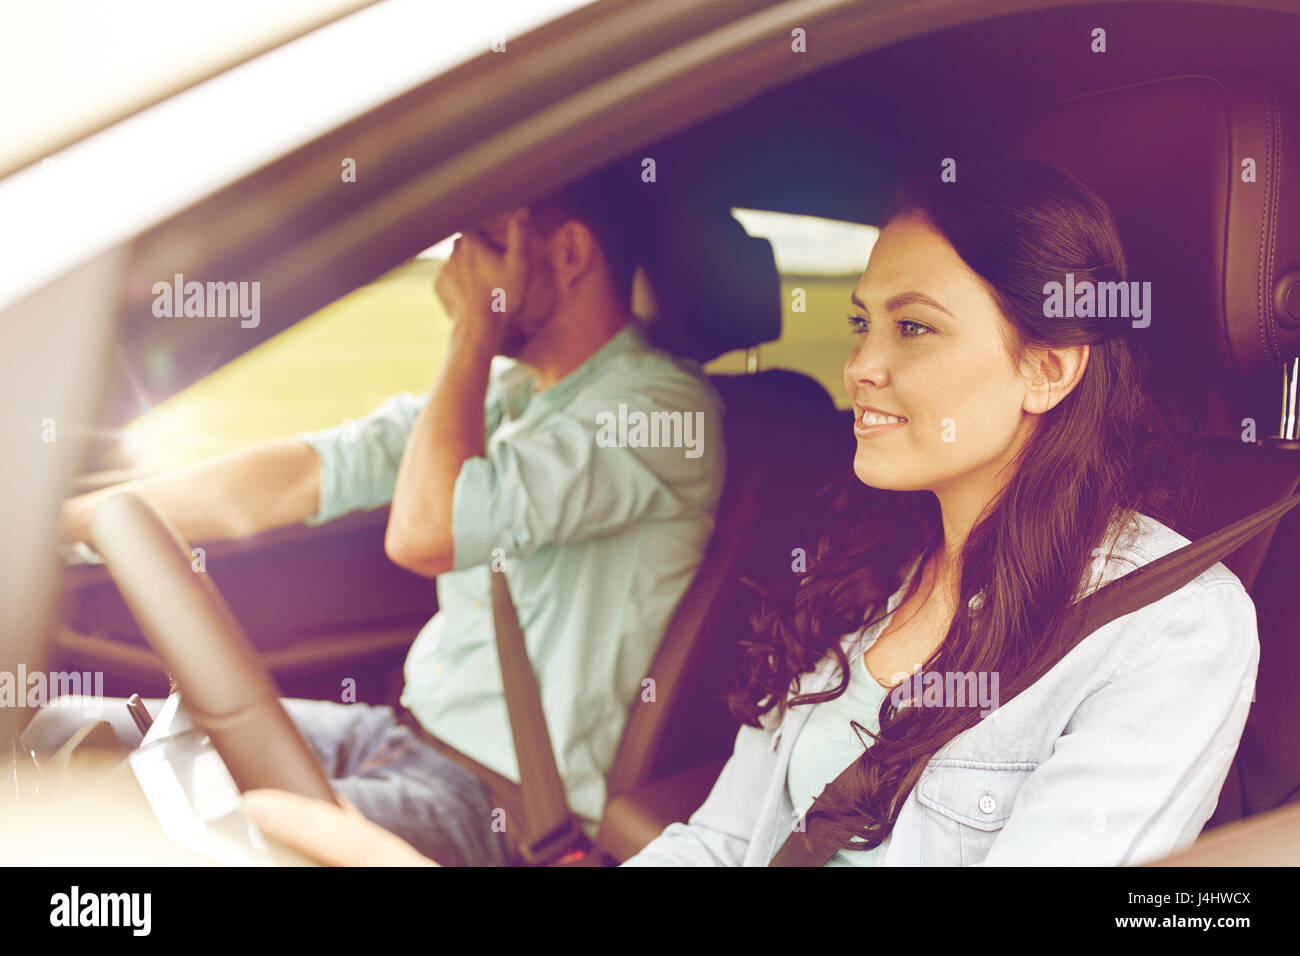 woman driving car and man covering face with palm Stock Photo